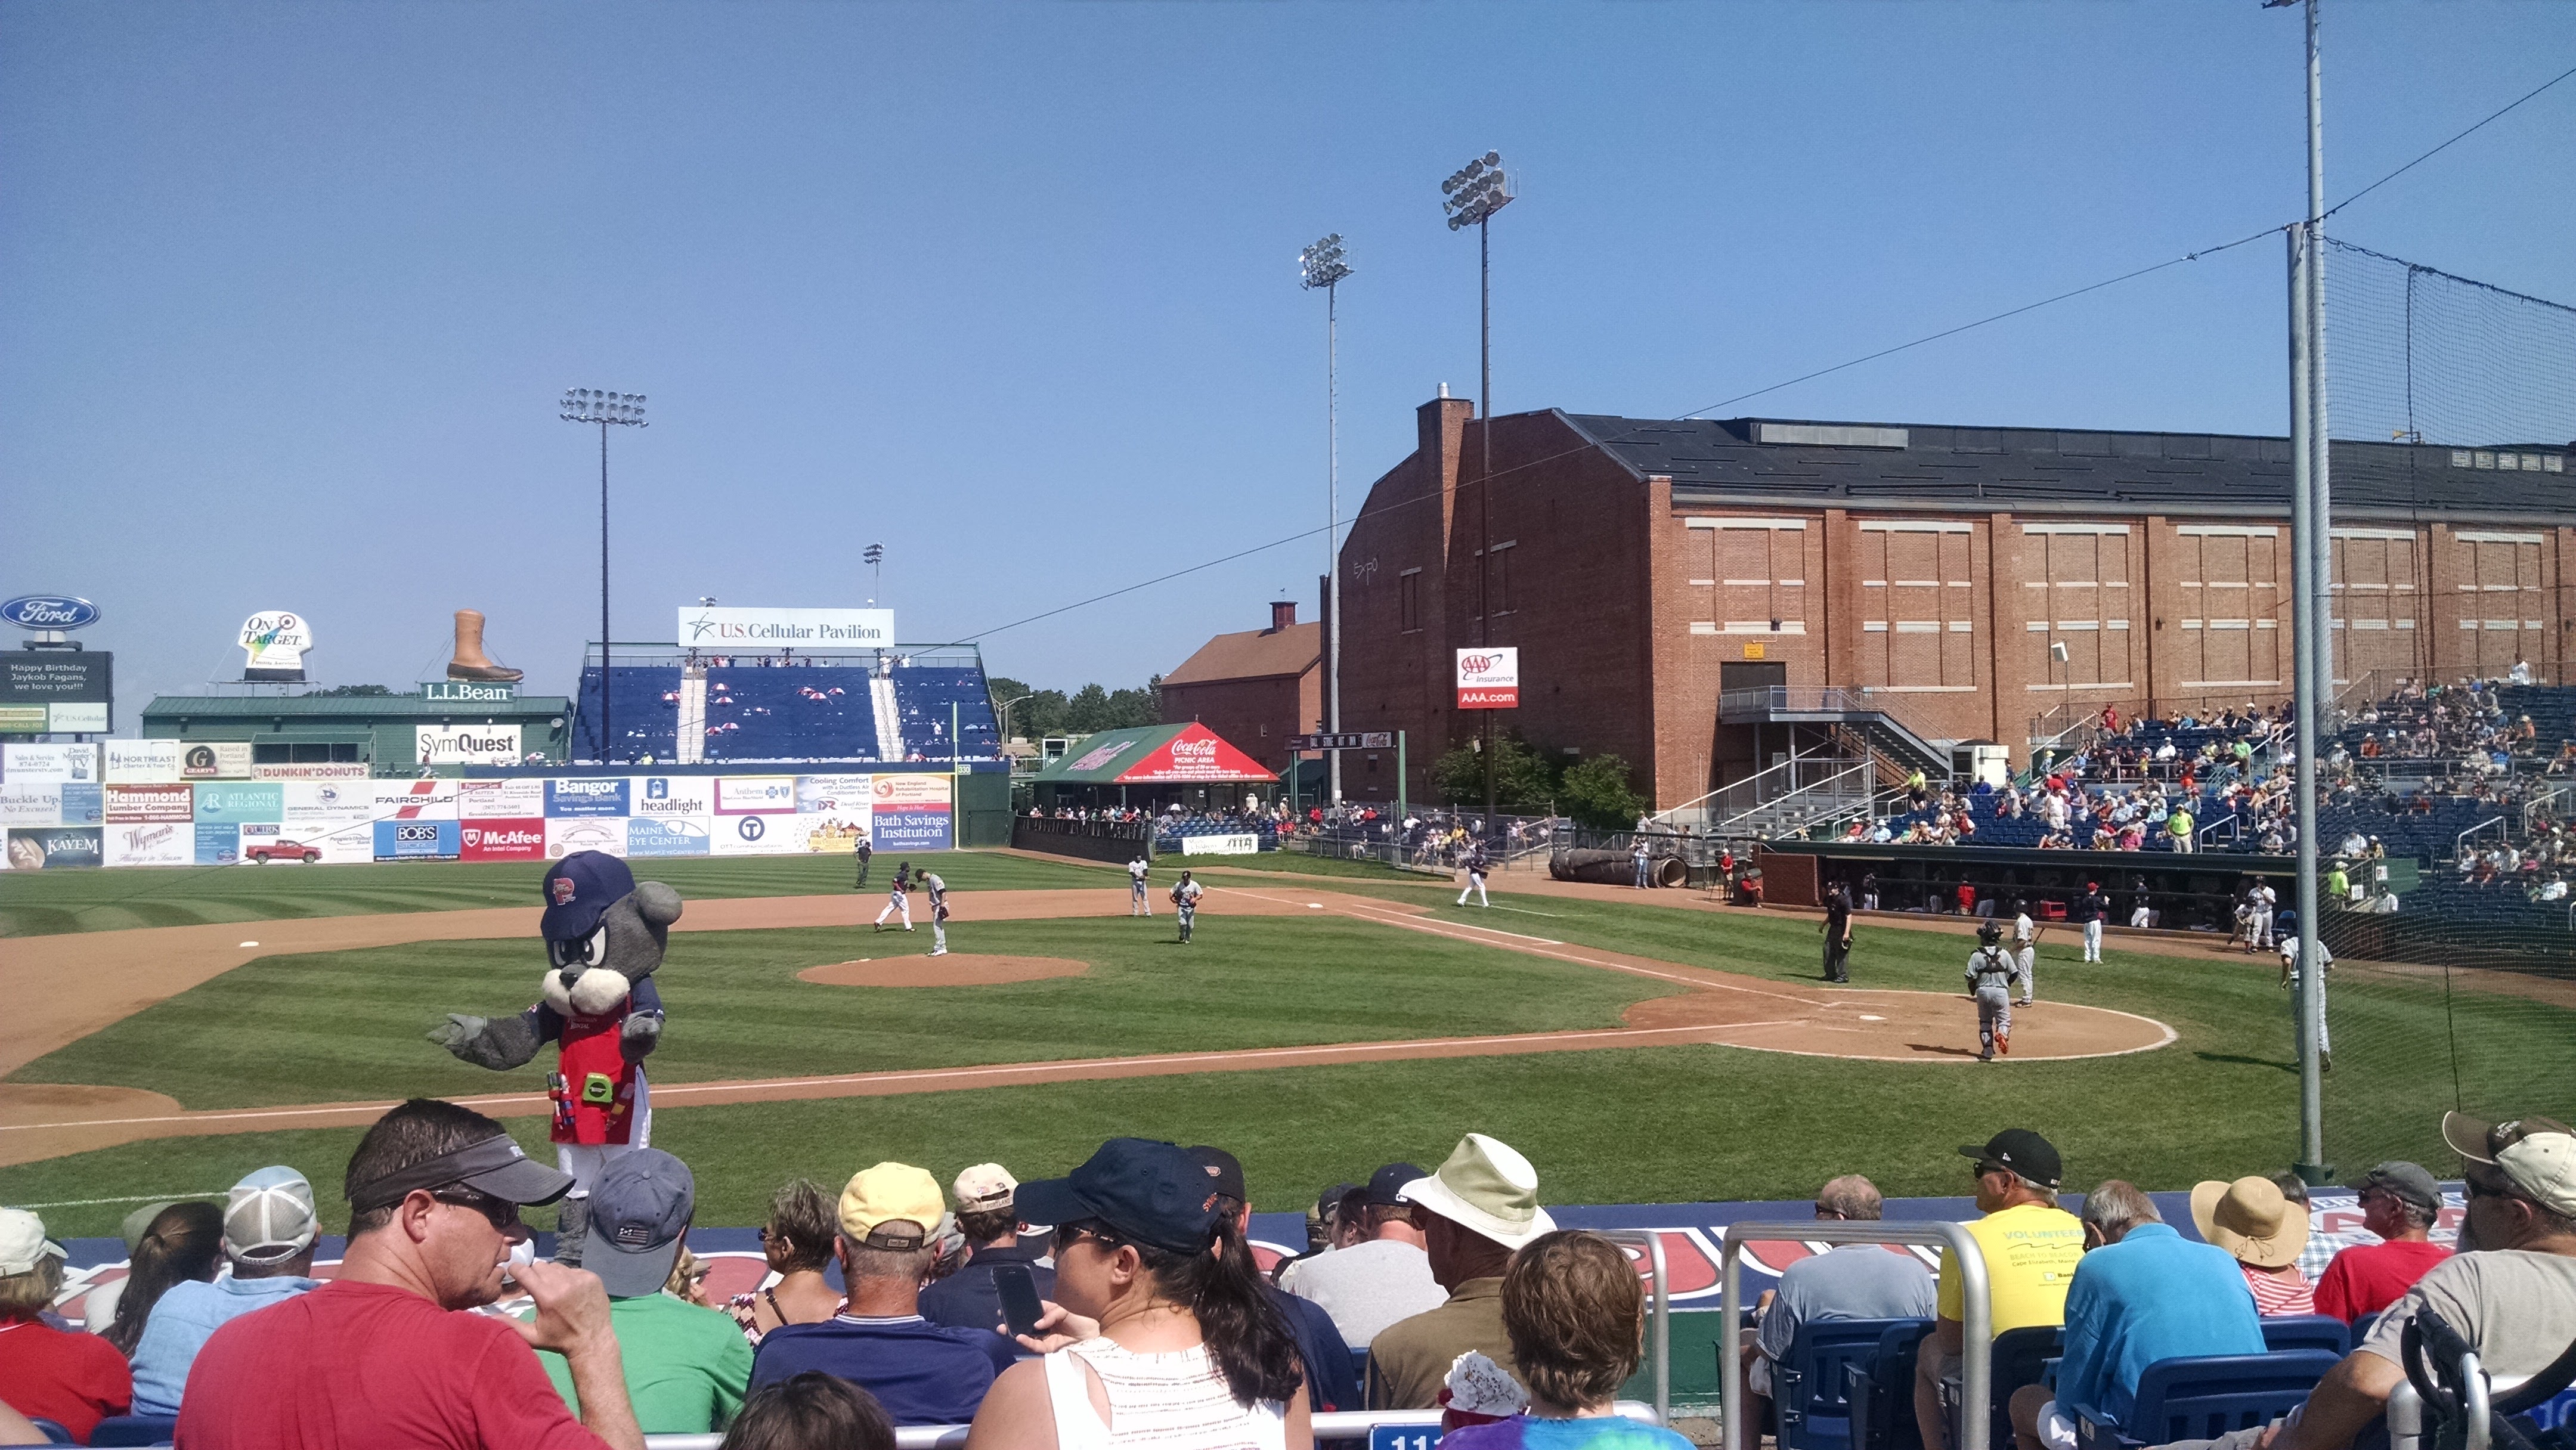 Hot day at Hadlock!  Too bad the Sea Dogs lost...